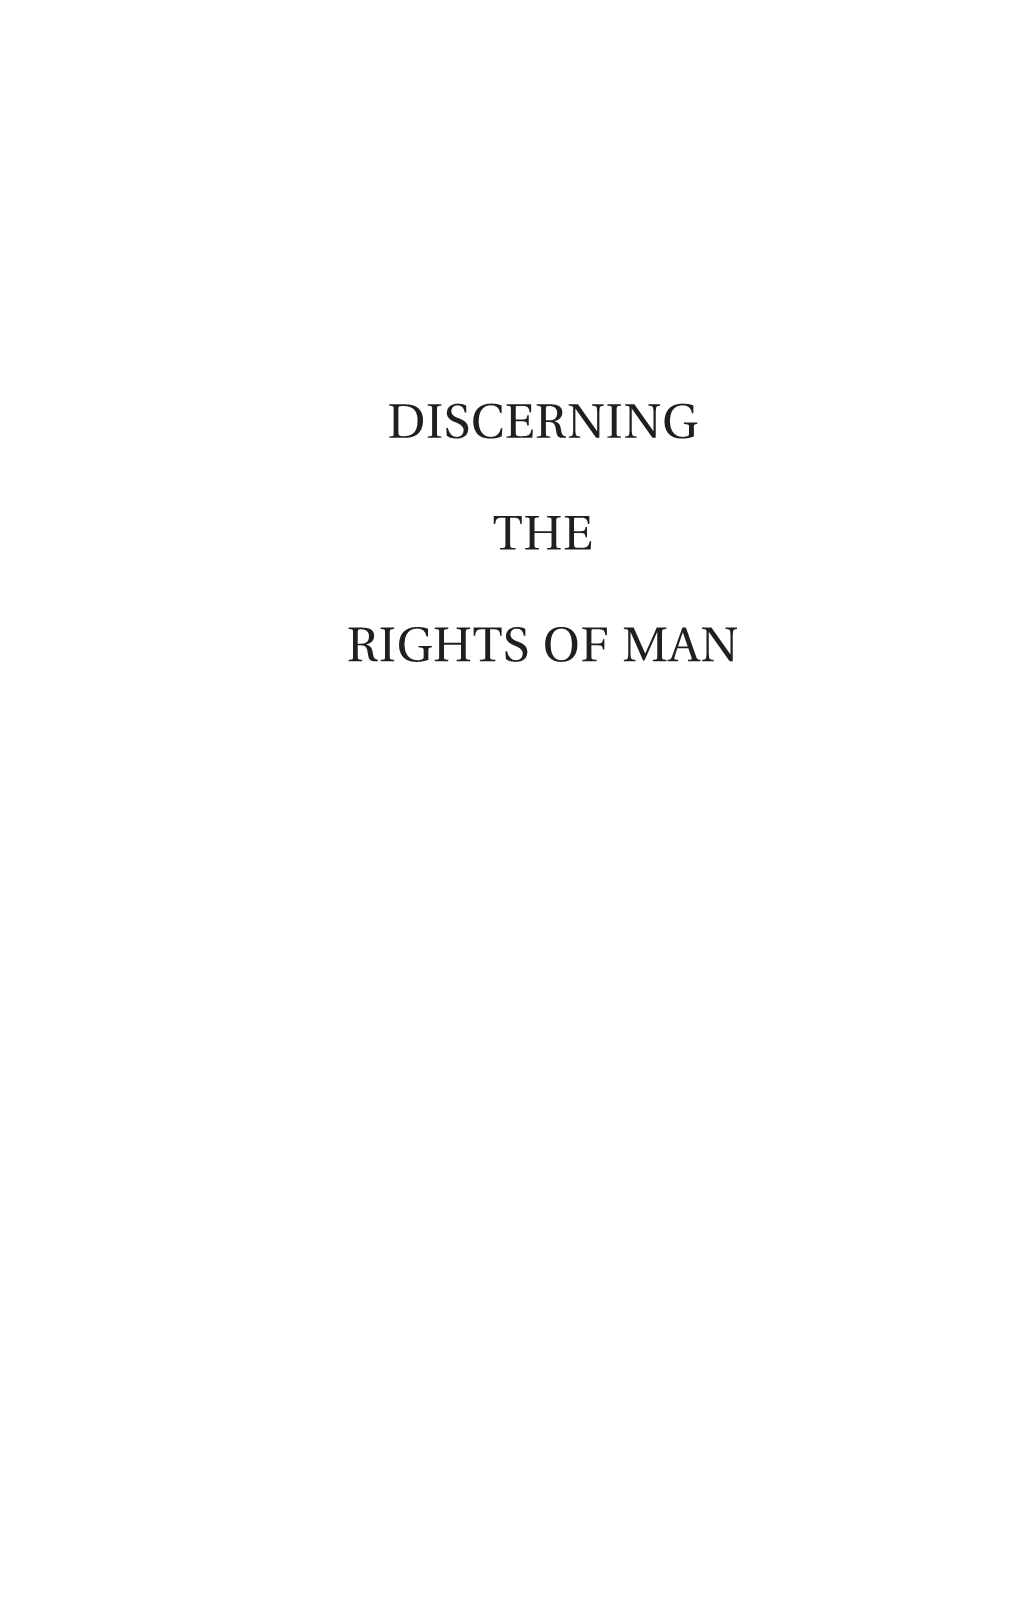 Discerning the Rights of Man